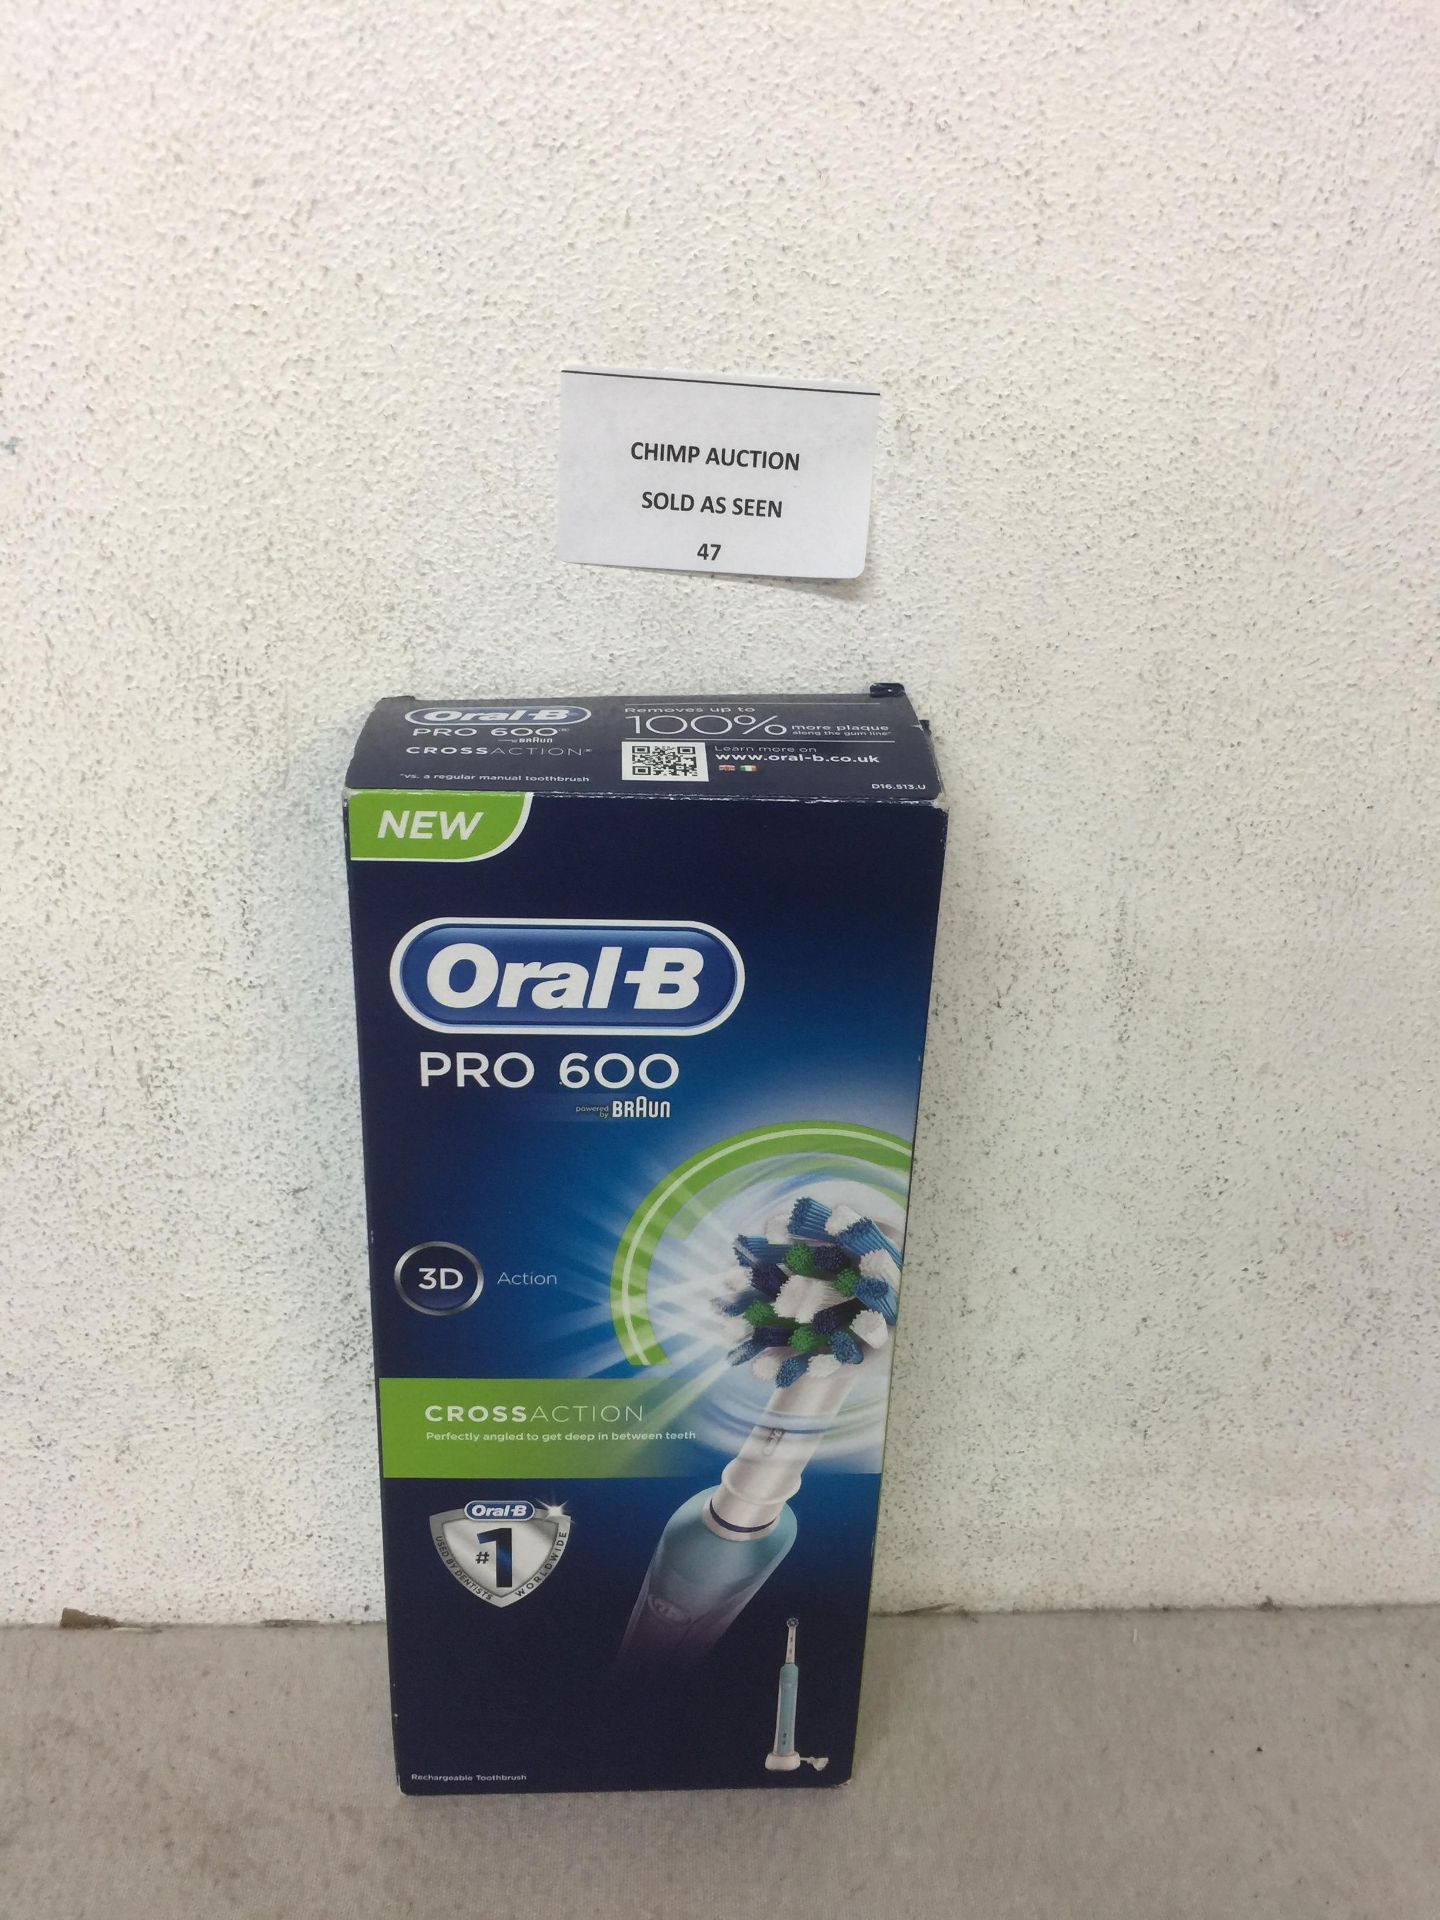 Oral-B Pro 600 CrossAction Electric Toothbrush powered by Braun